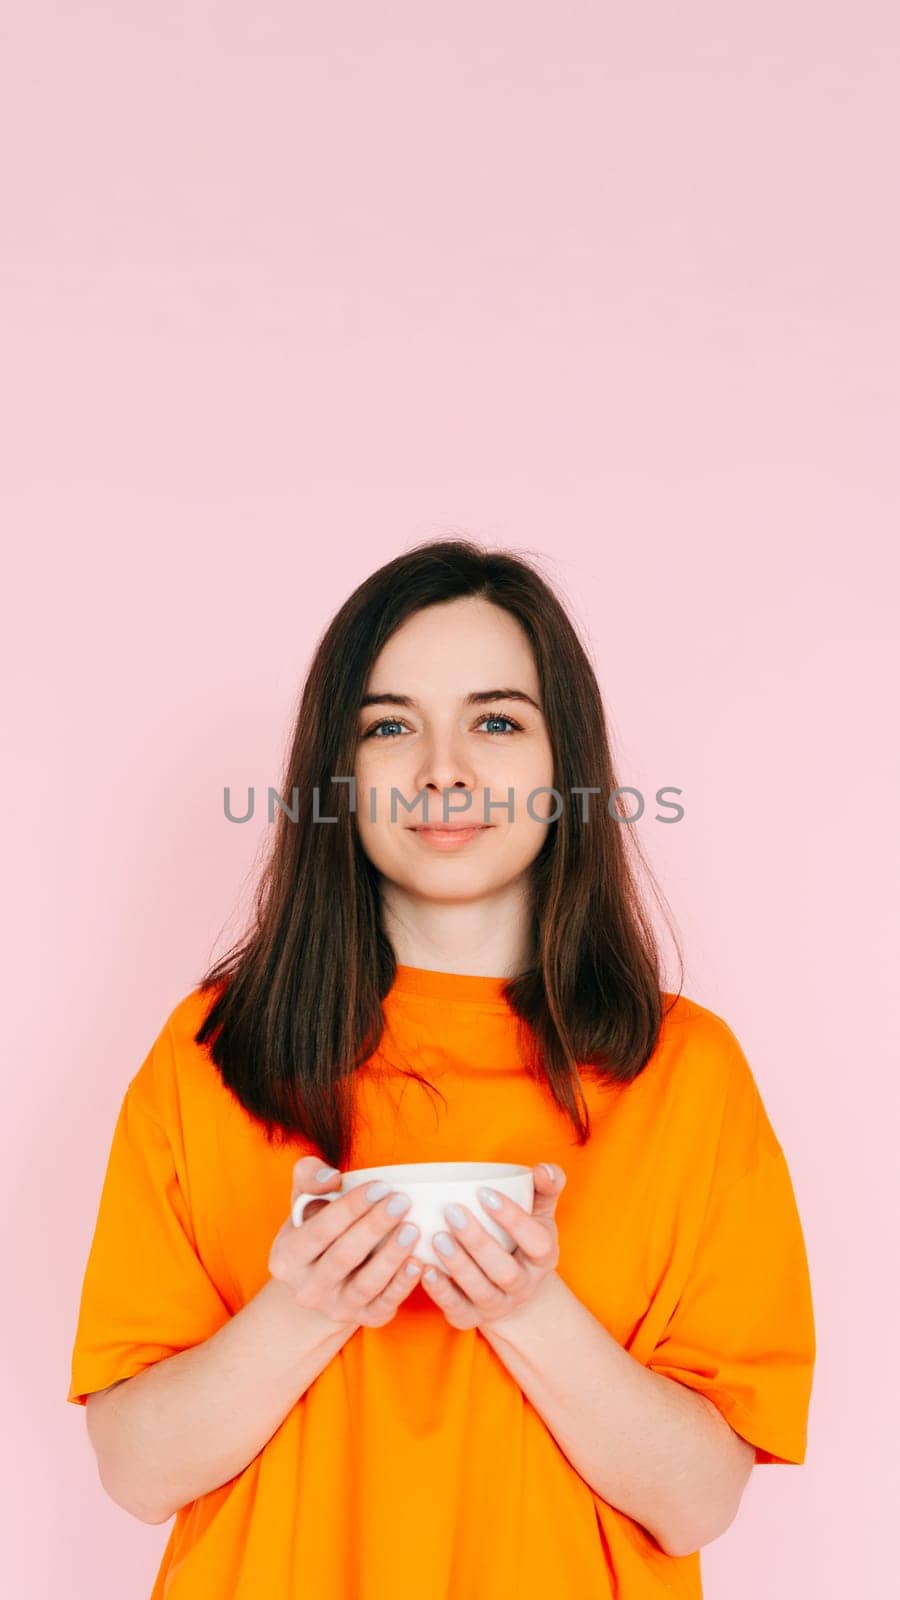 Serene Leisure: Charming Woman in Orange Attire, Savoring a Delightful Drink in a Mug - Relishing Free Time After Work, Tranquility and Bliss Isolated on Pink Background.